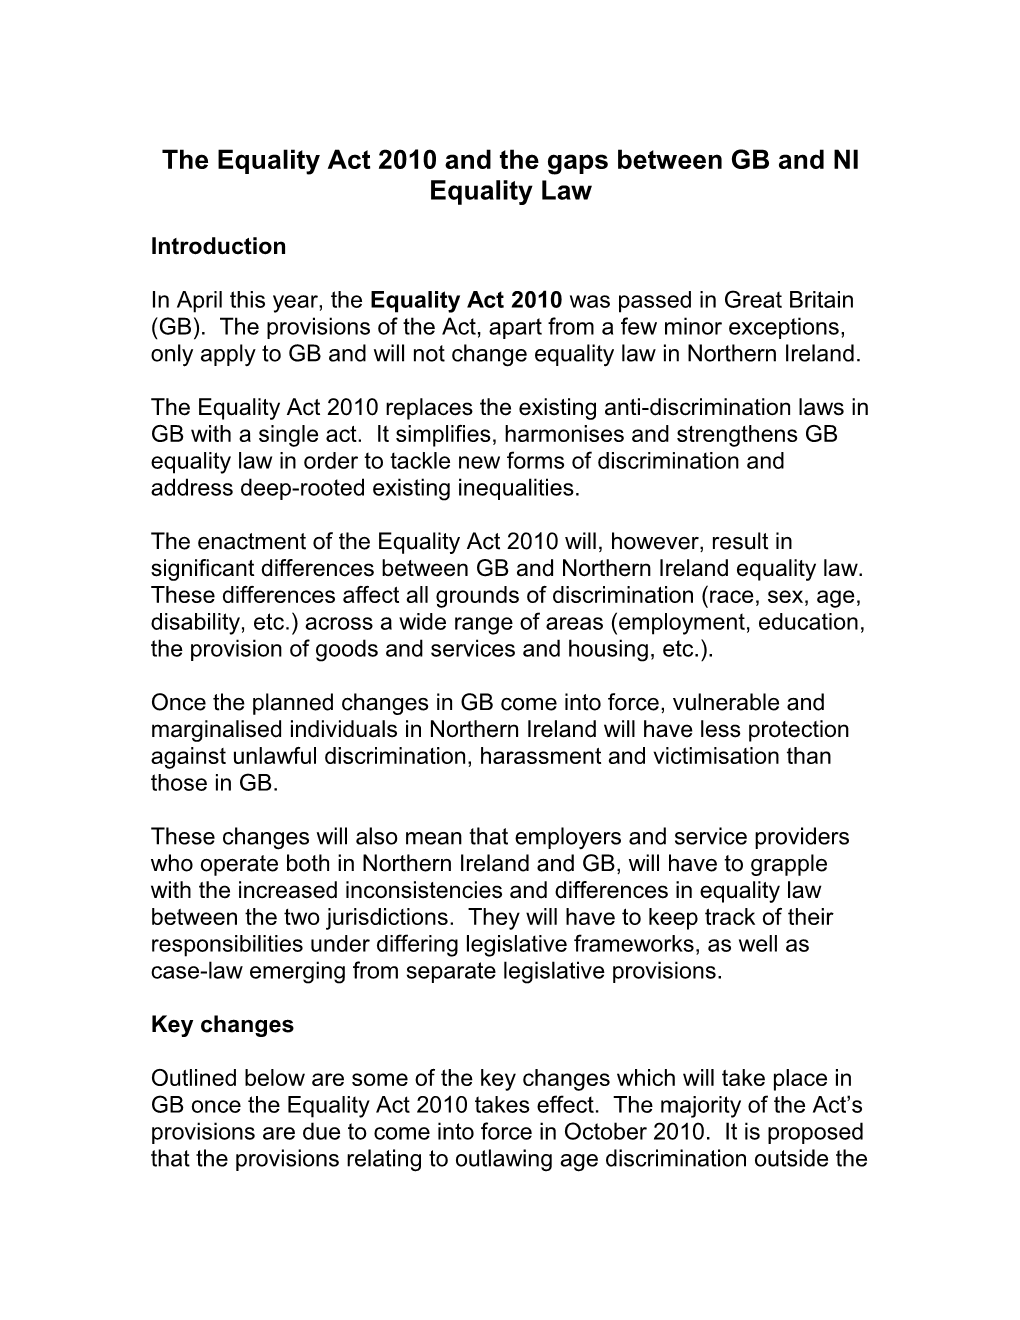 The Equality Act 2010 and the Gaps Between GB and NI Equality Law